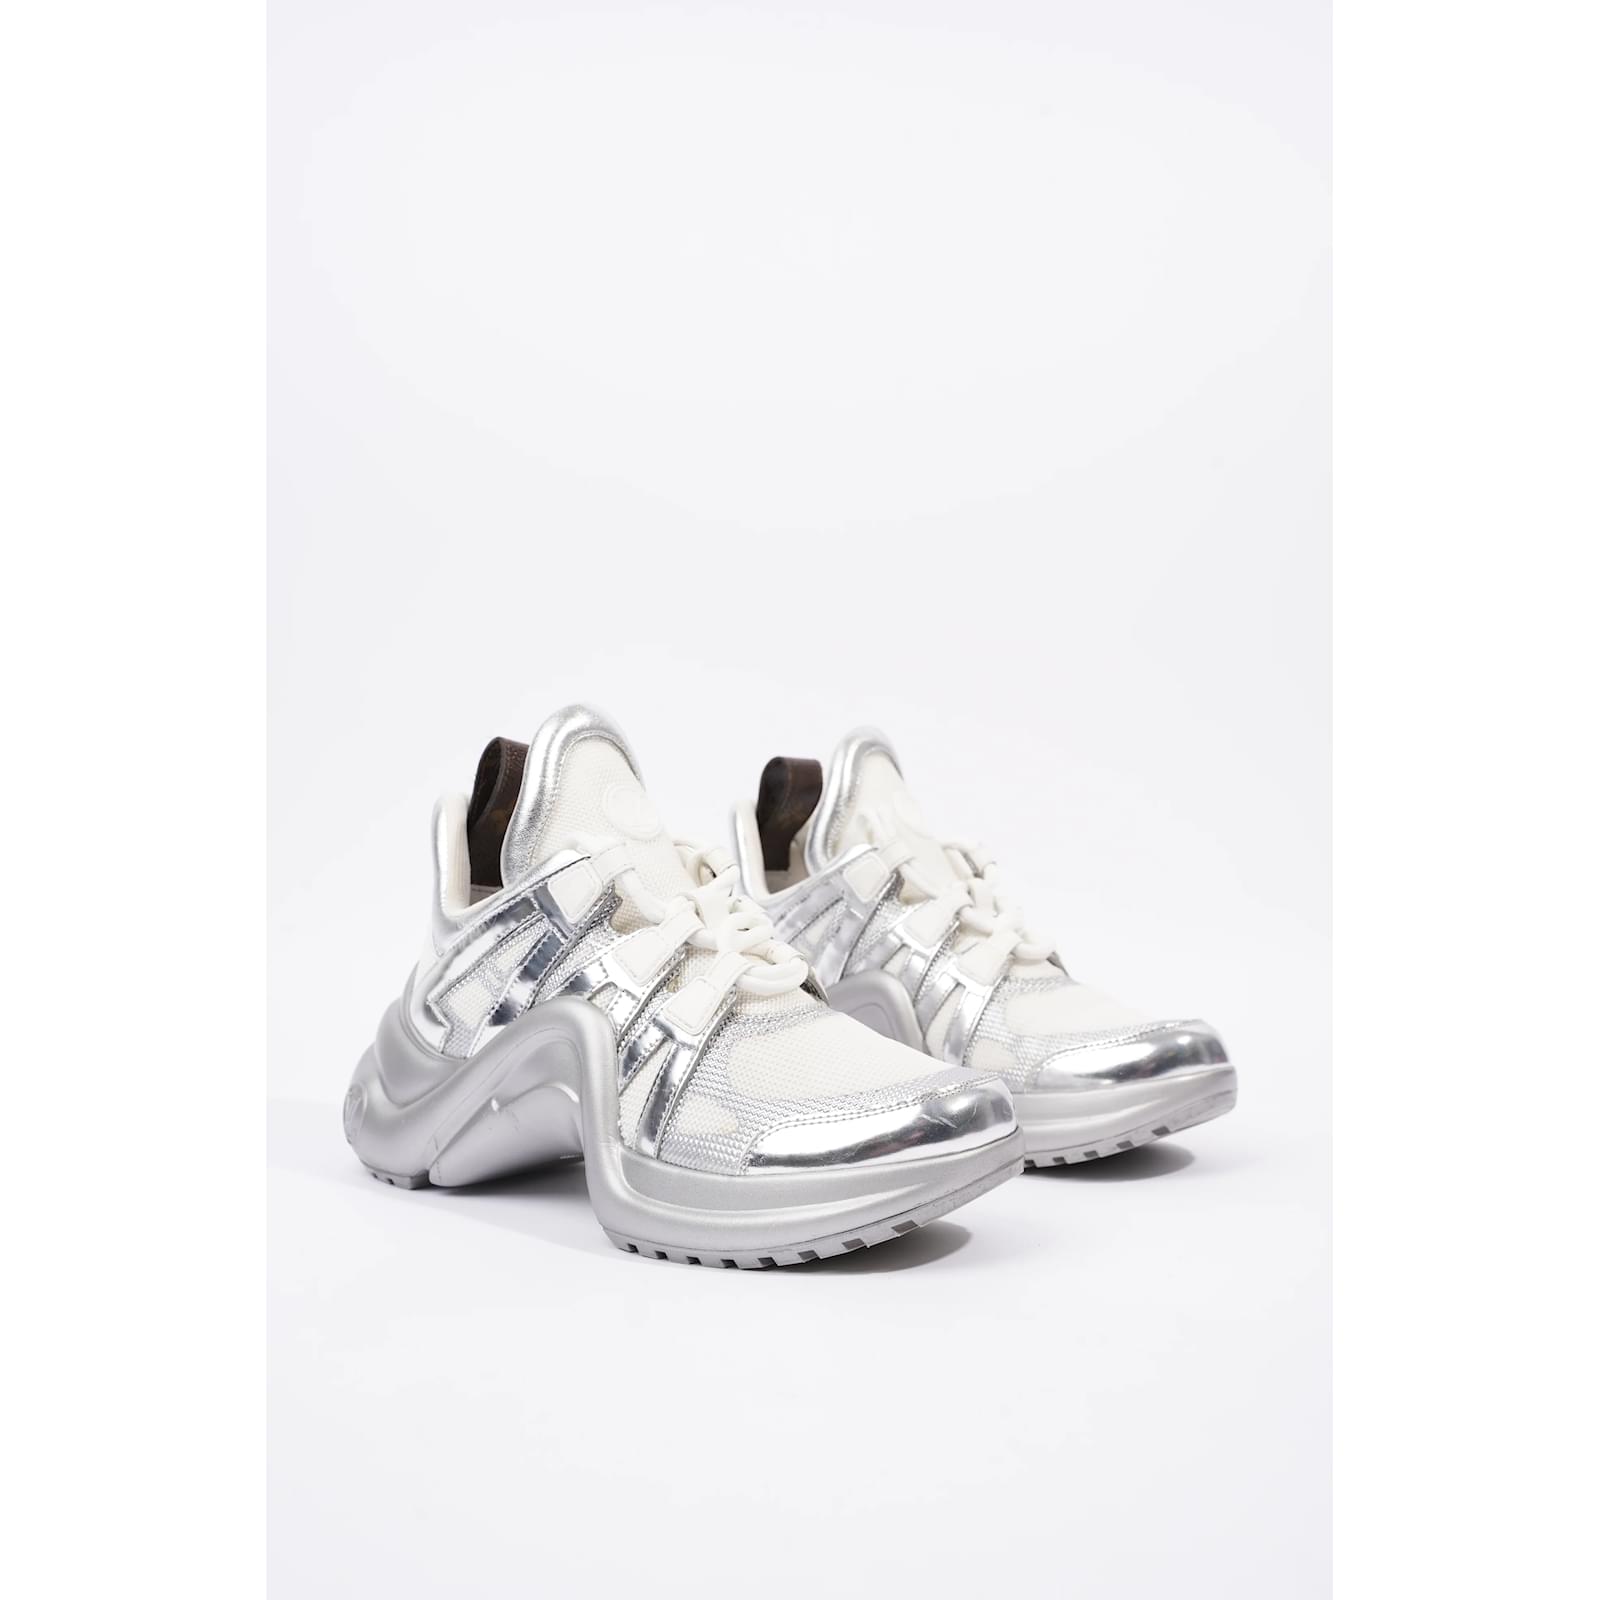 Louis Vuitton Silver/White Leather And Mesh Archlight Sneakers